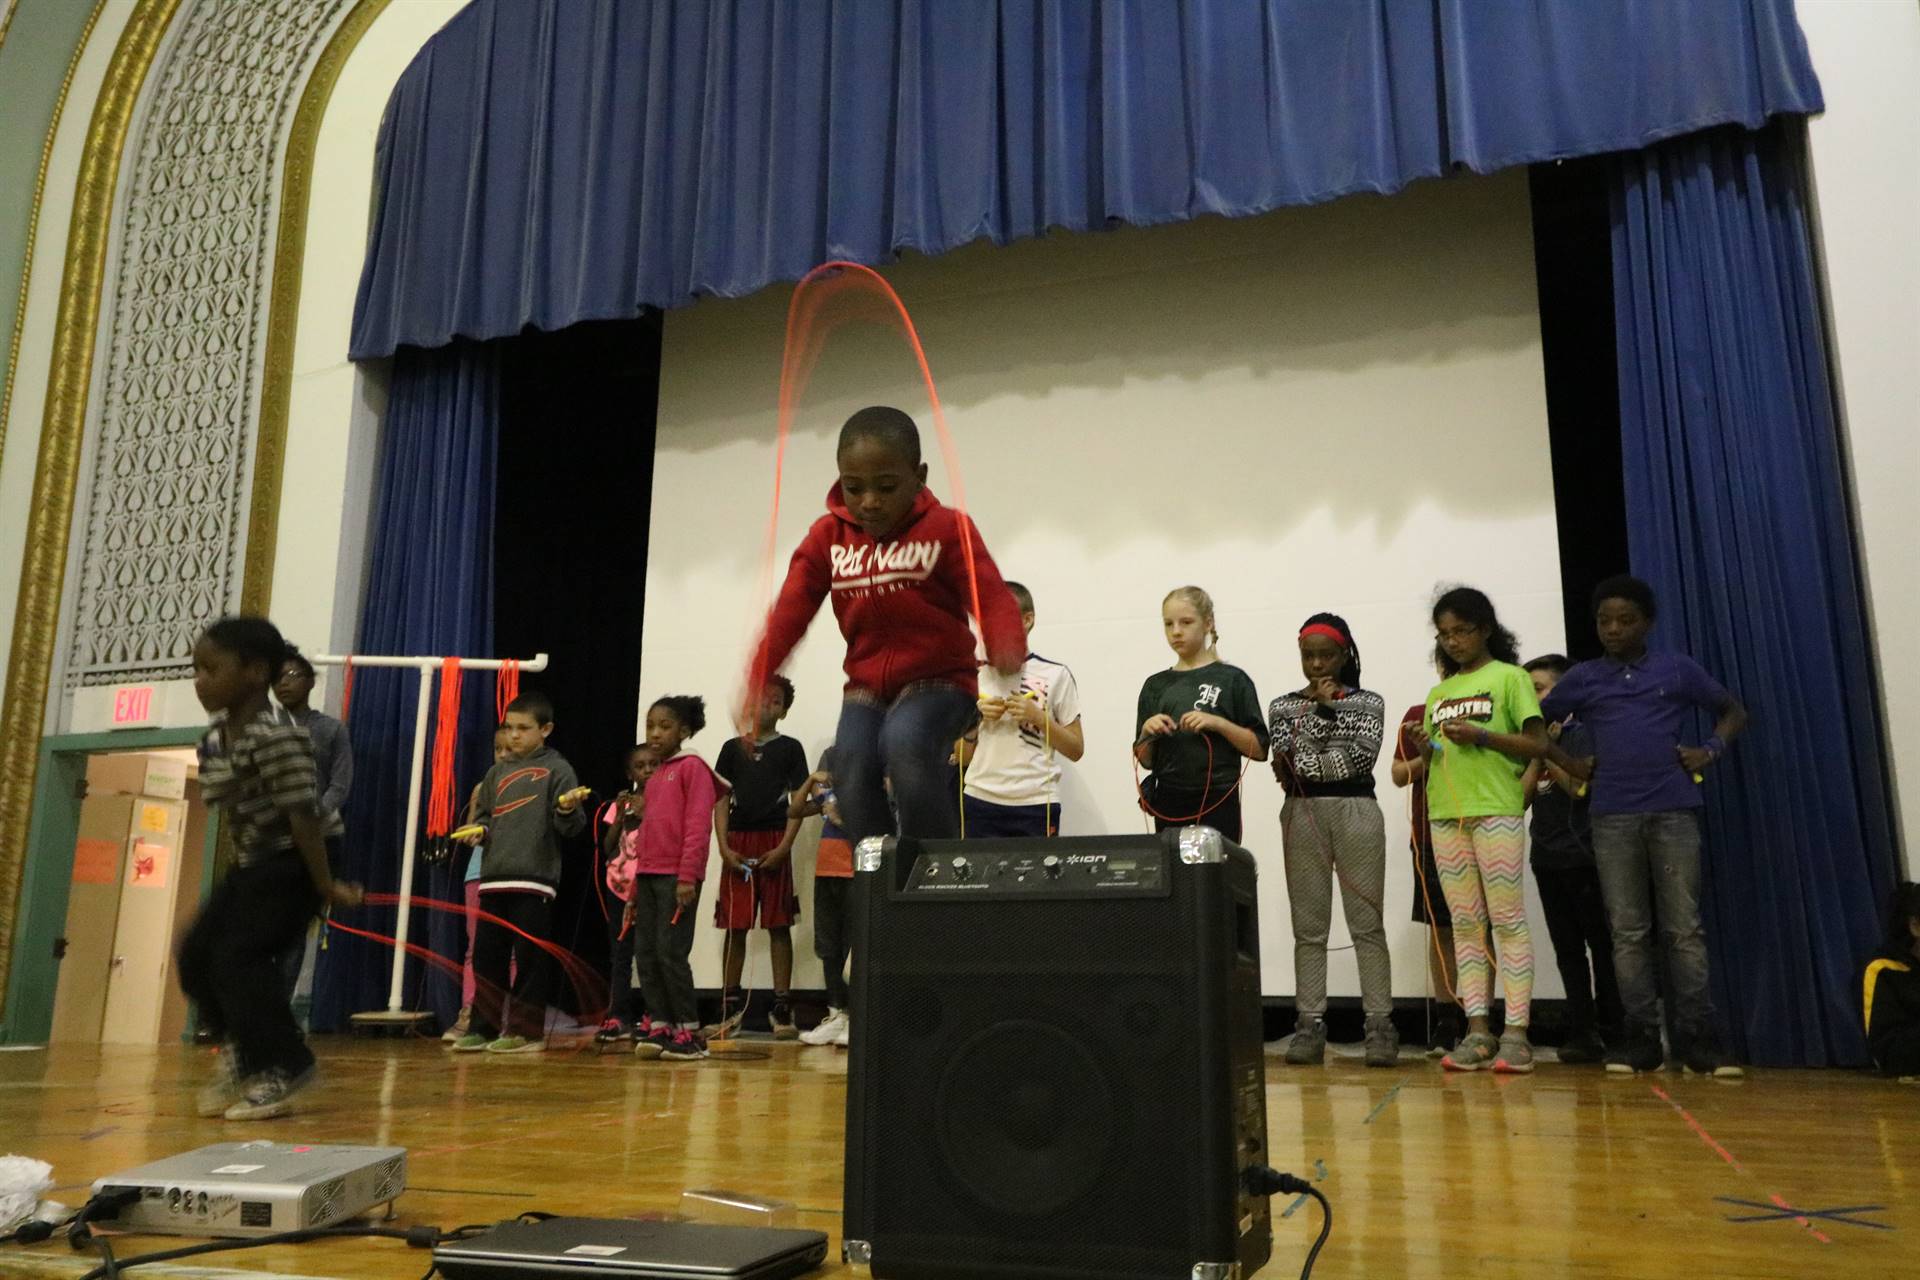 Students on stage jumping rope